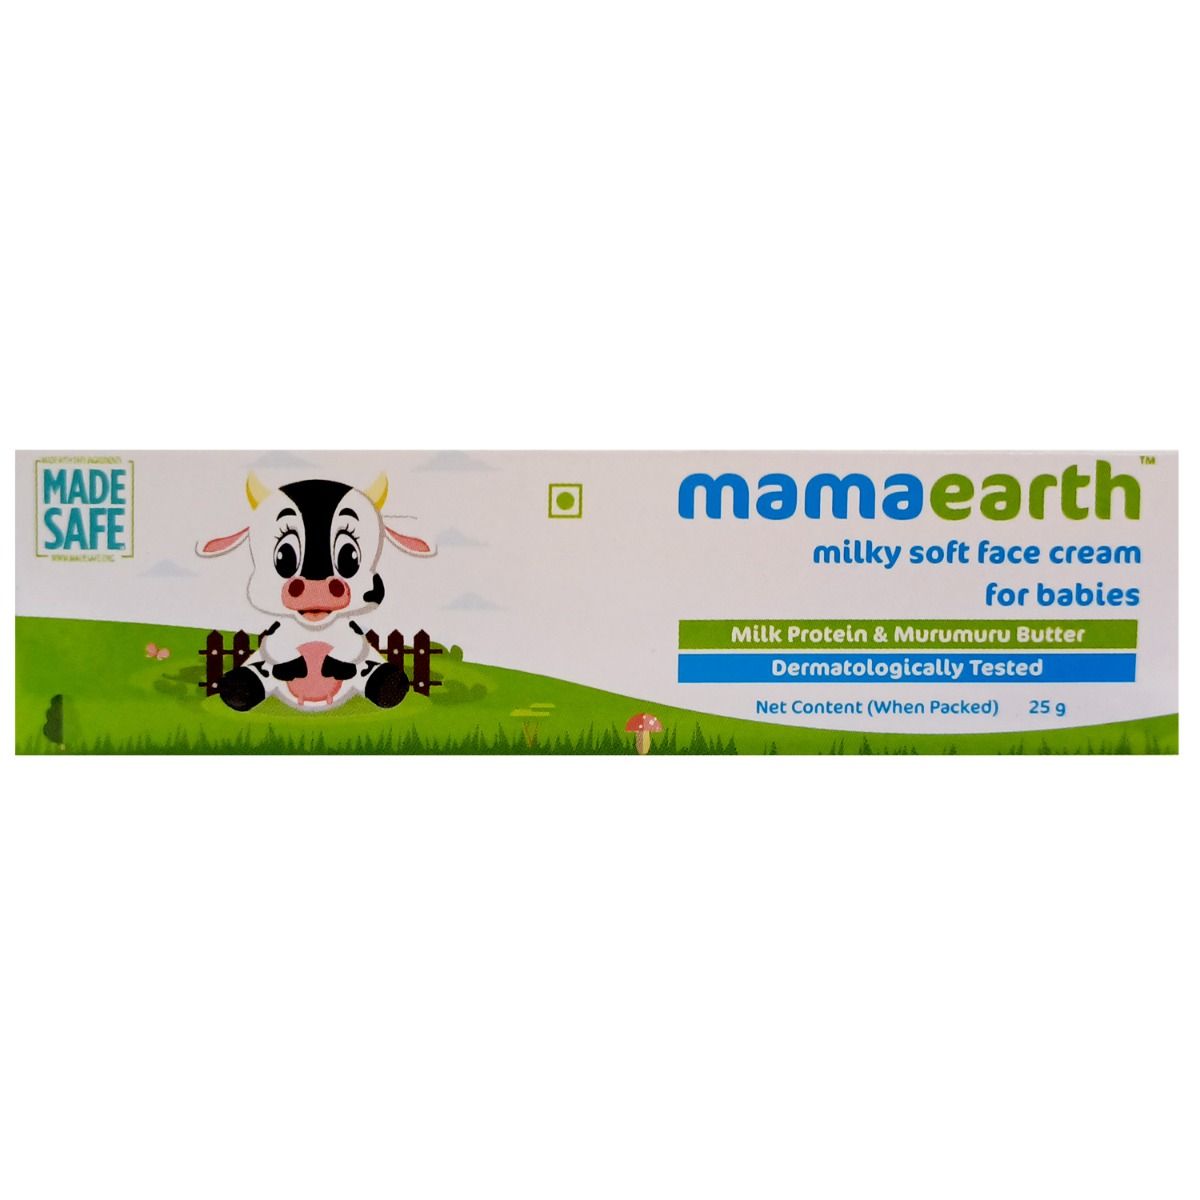 Buy Mamaearth Milky Soft Face Cream Babies, 25 gm Online